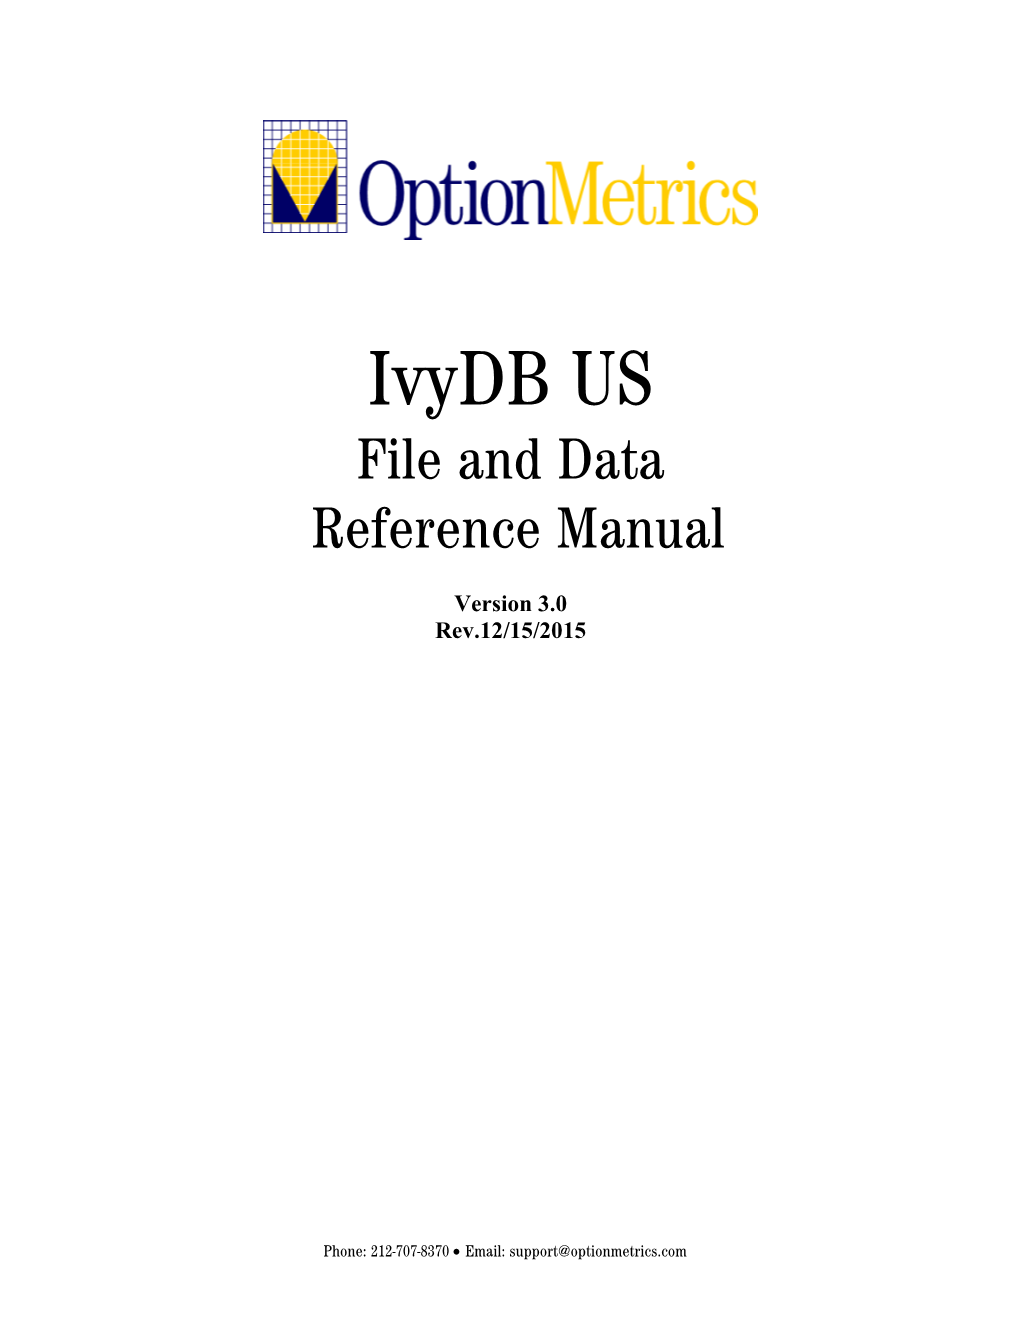 Ivydb US File and Data Reference Manual